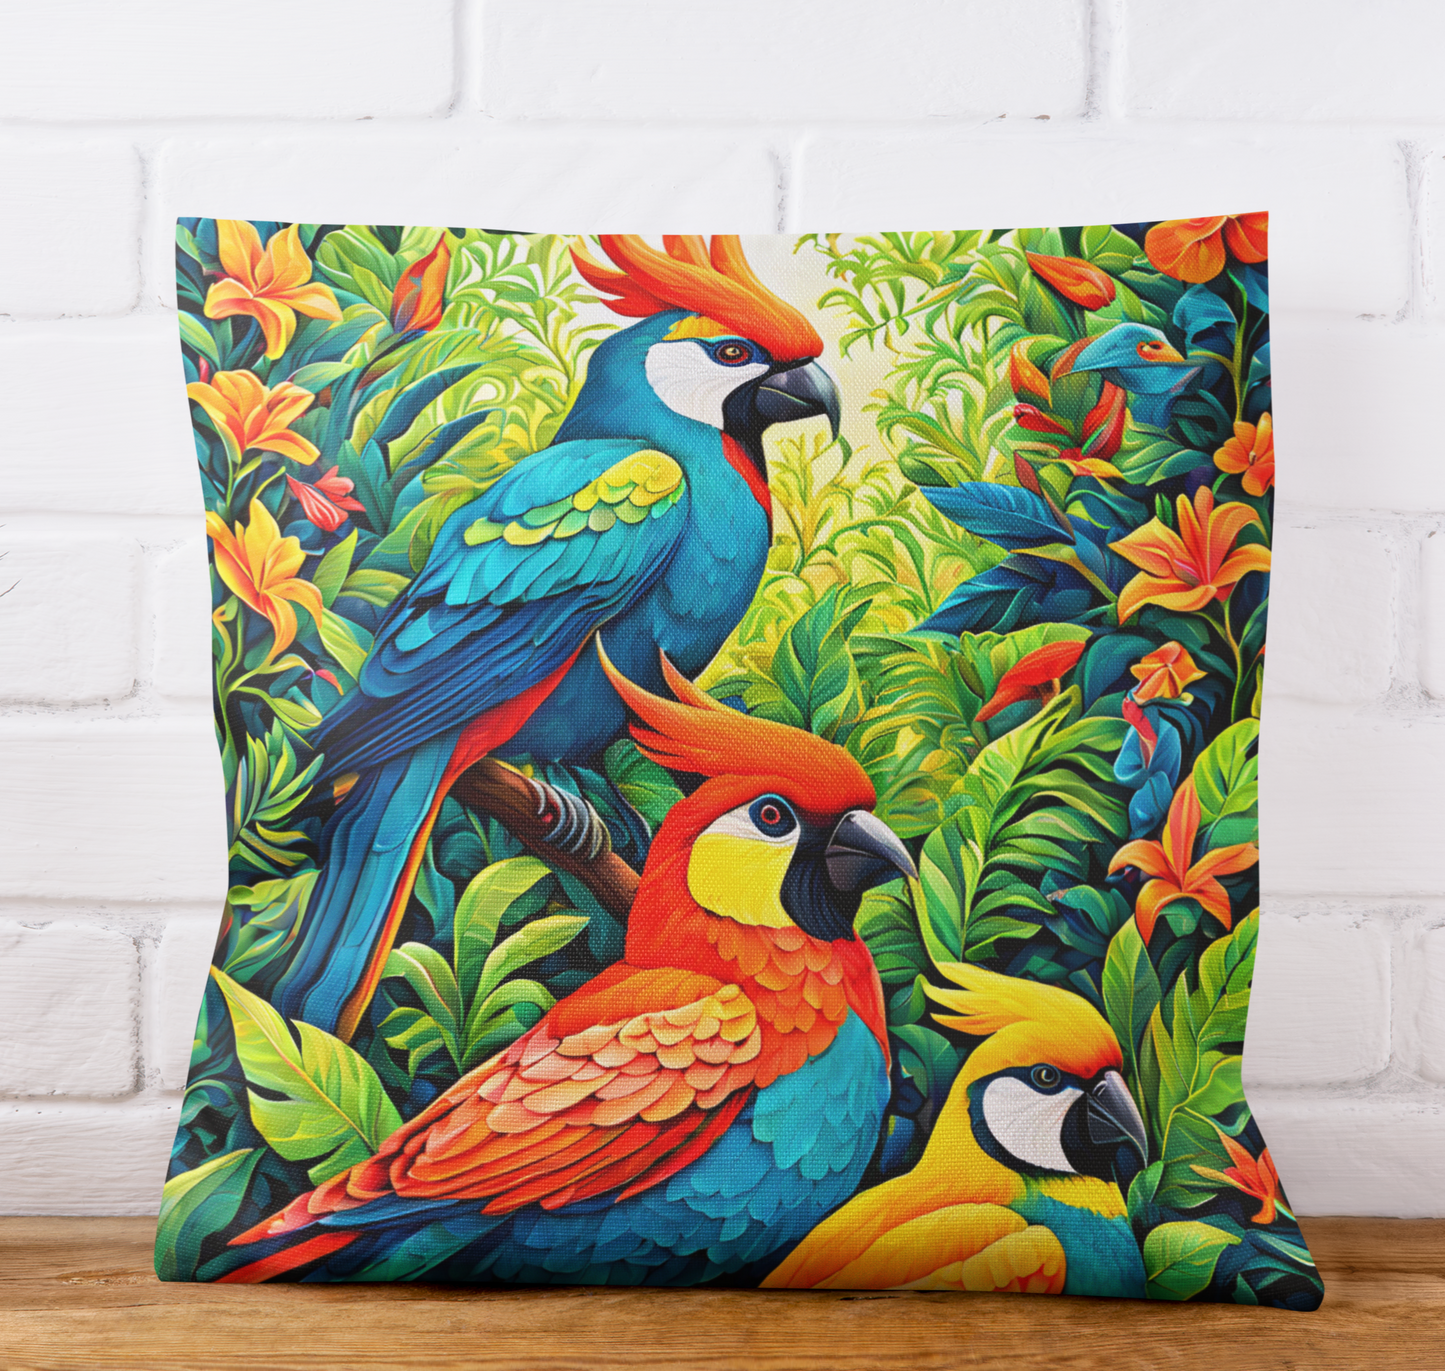 Colorful Birds Square Pillow